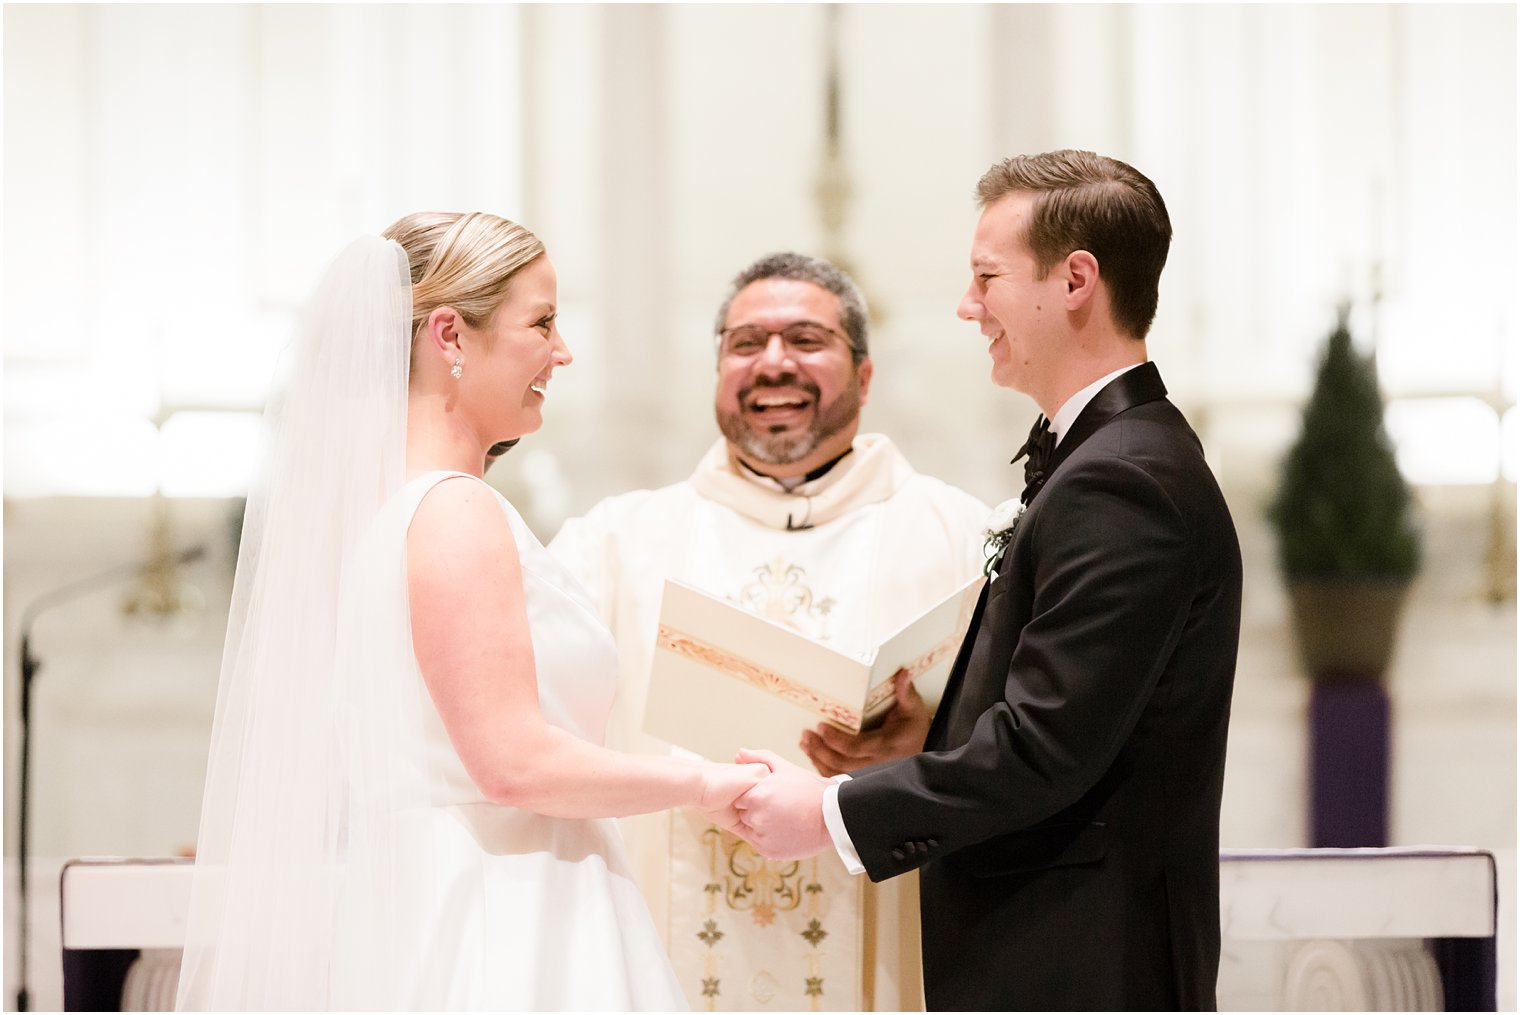 exchange of vows at Church of the Immaculate Conception in Montclair, NJ